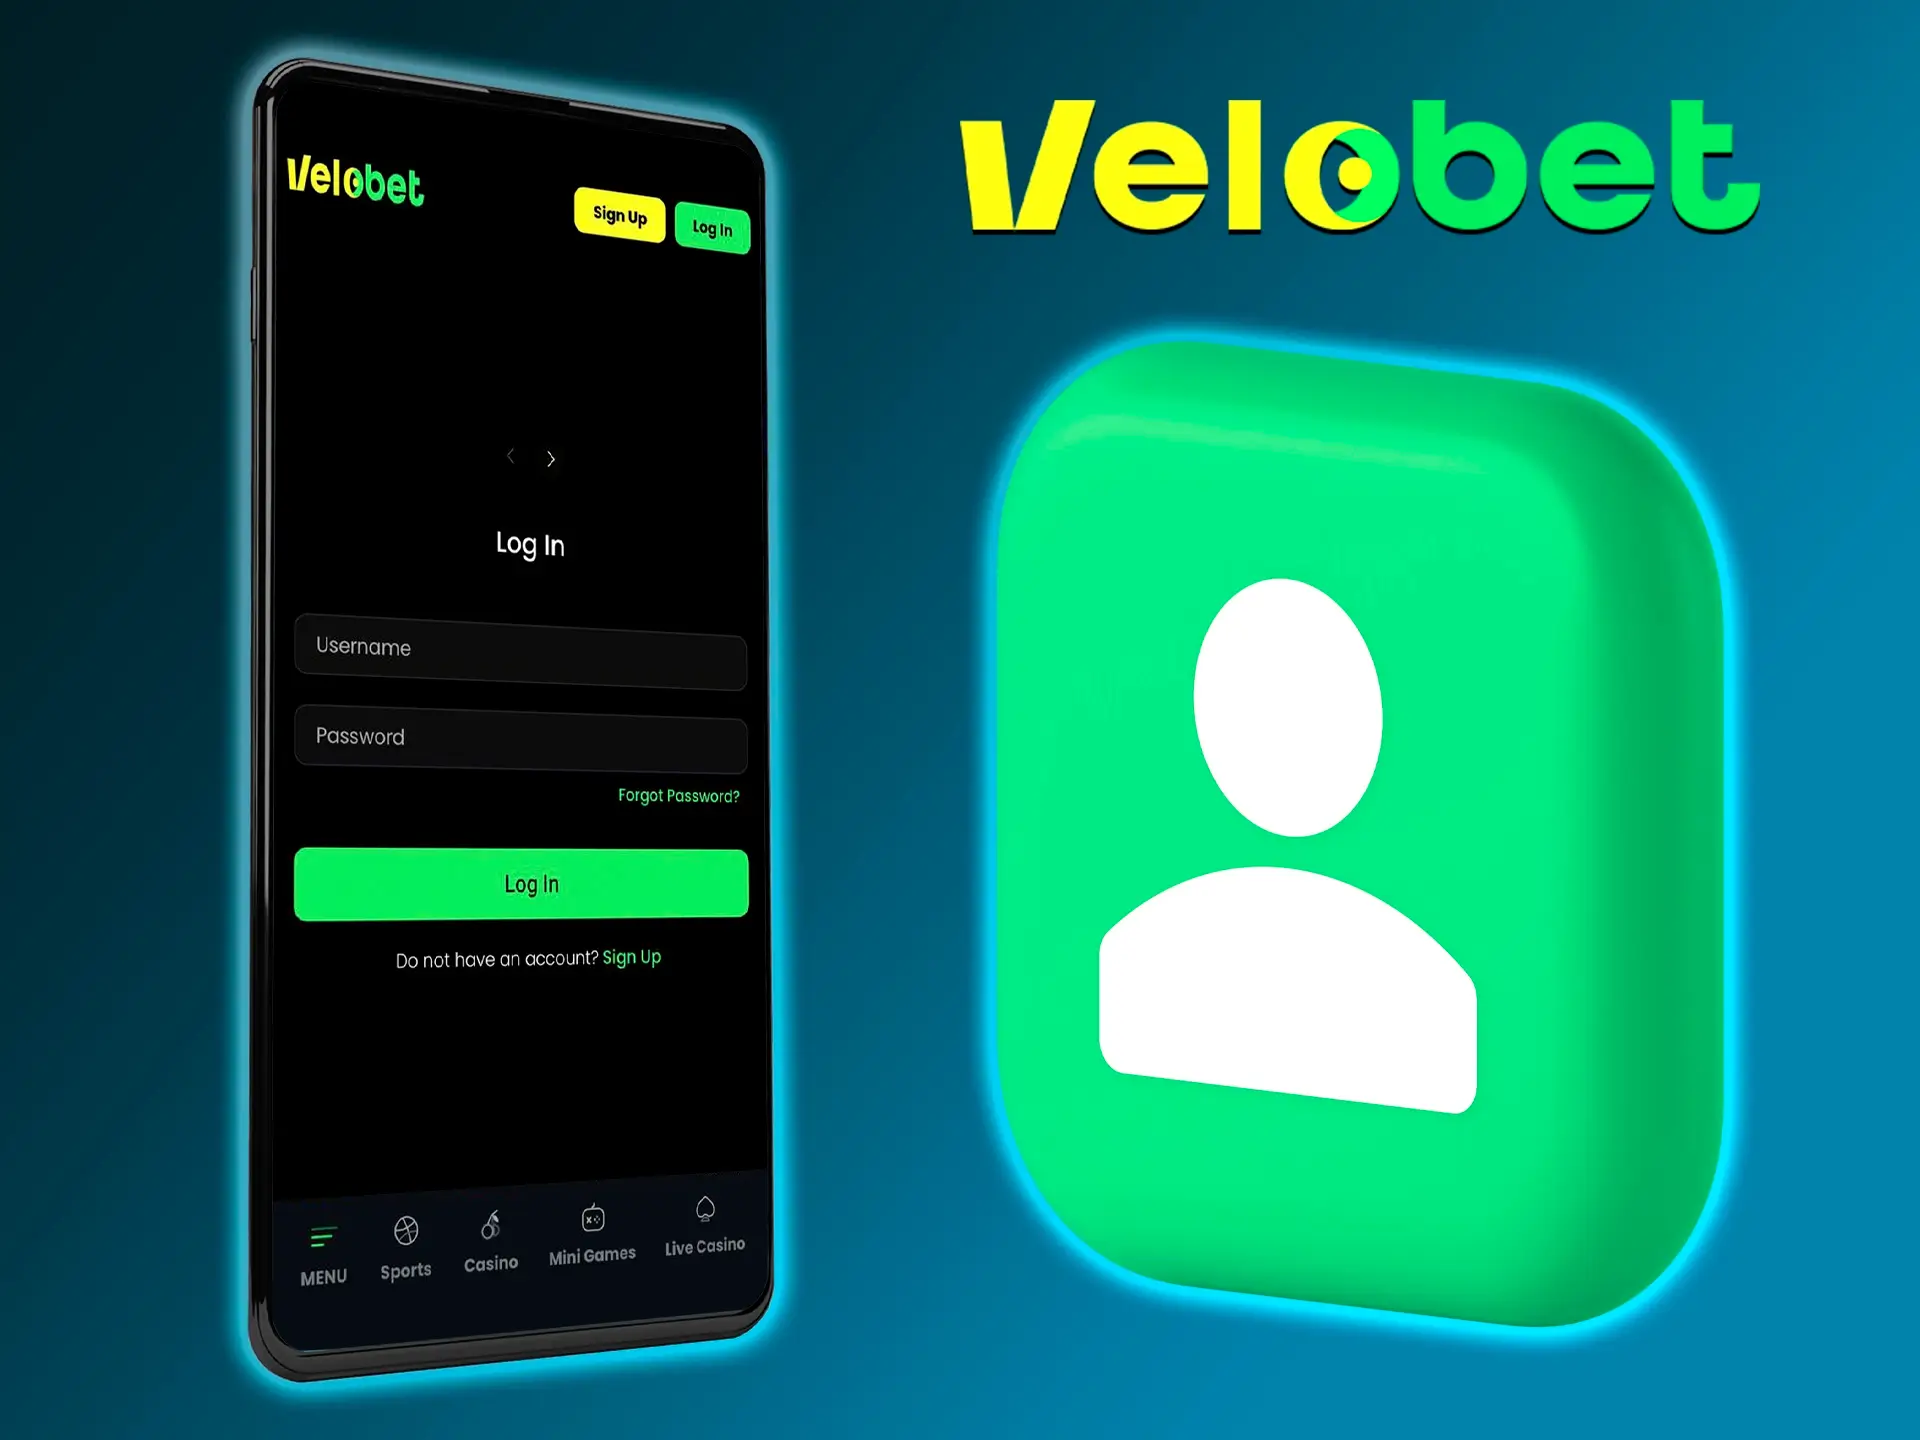 Log in to your Velobet personal account to get full access to the app's functionality.